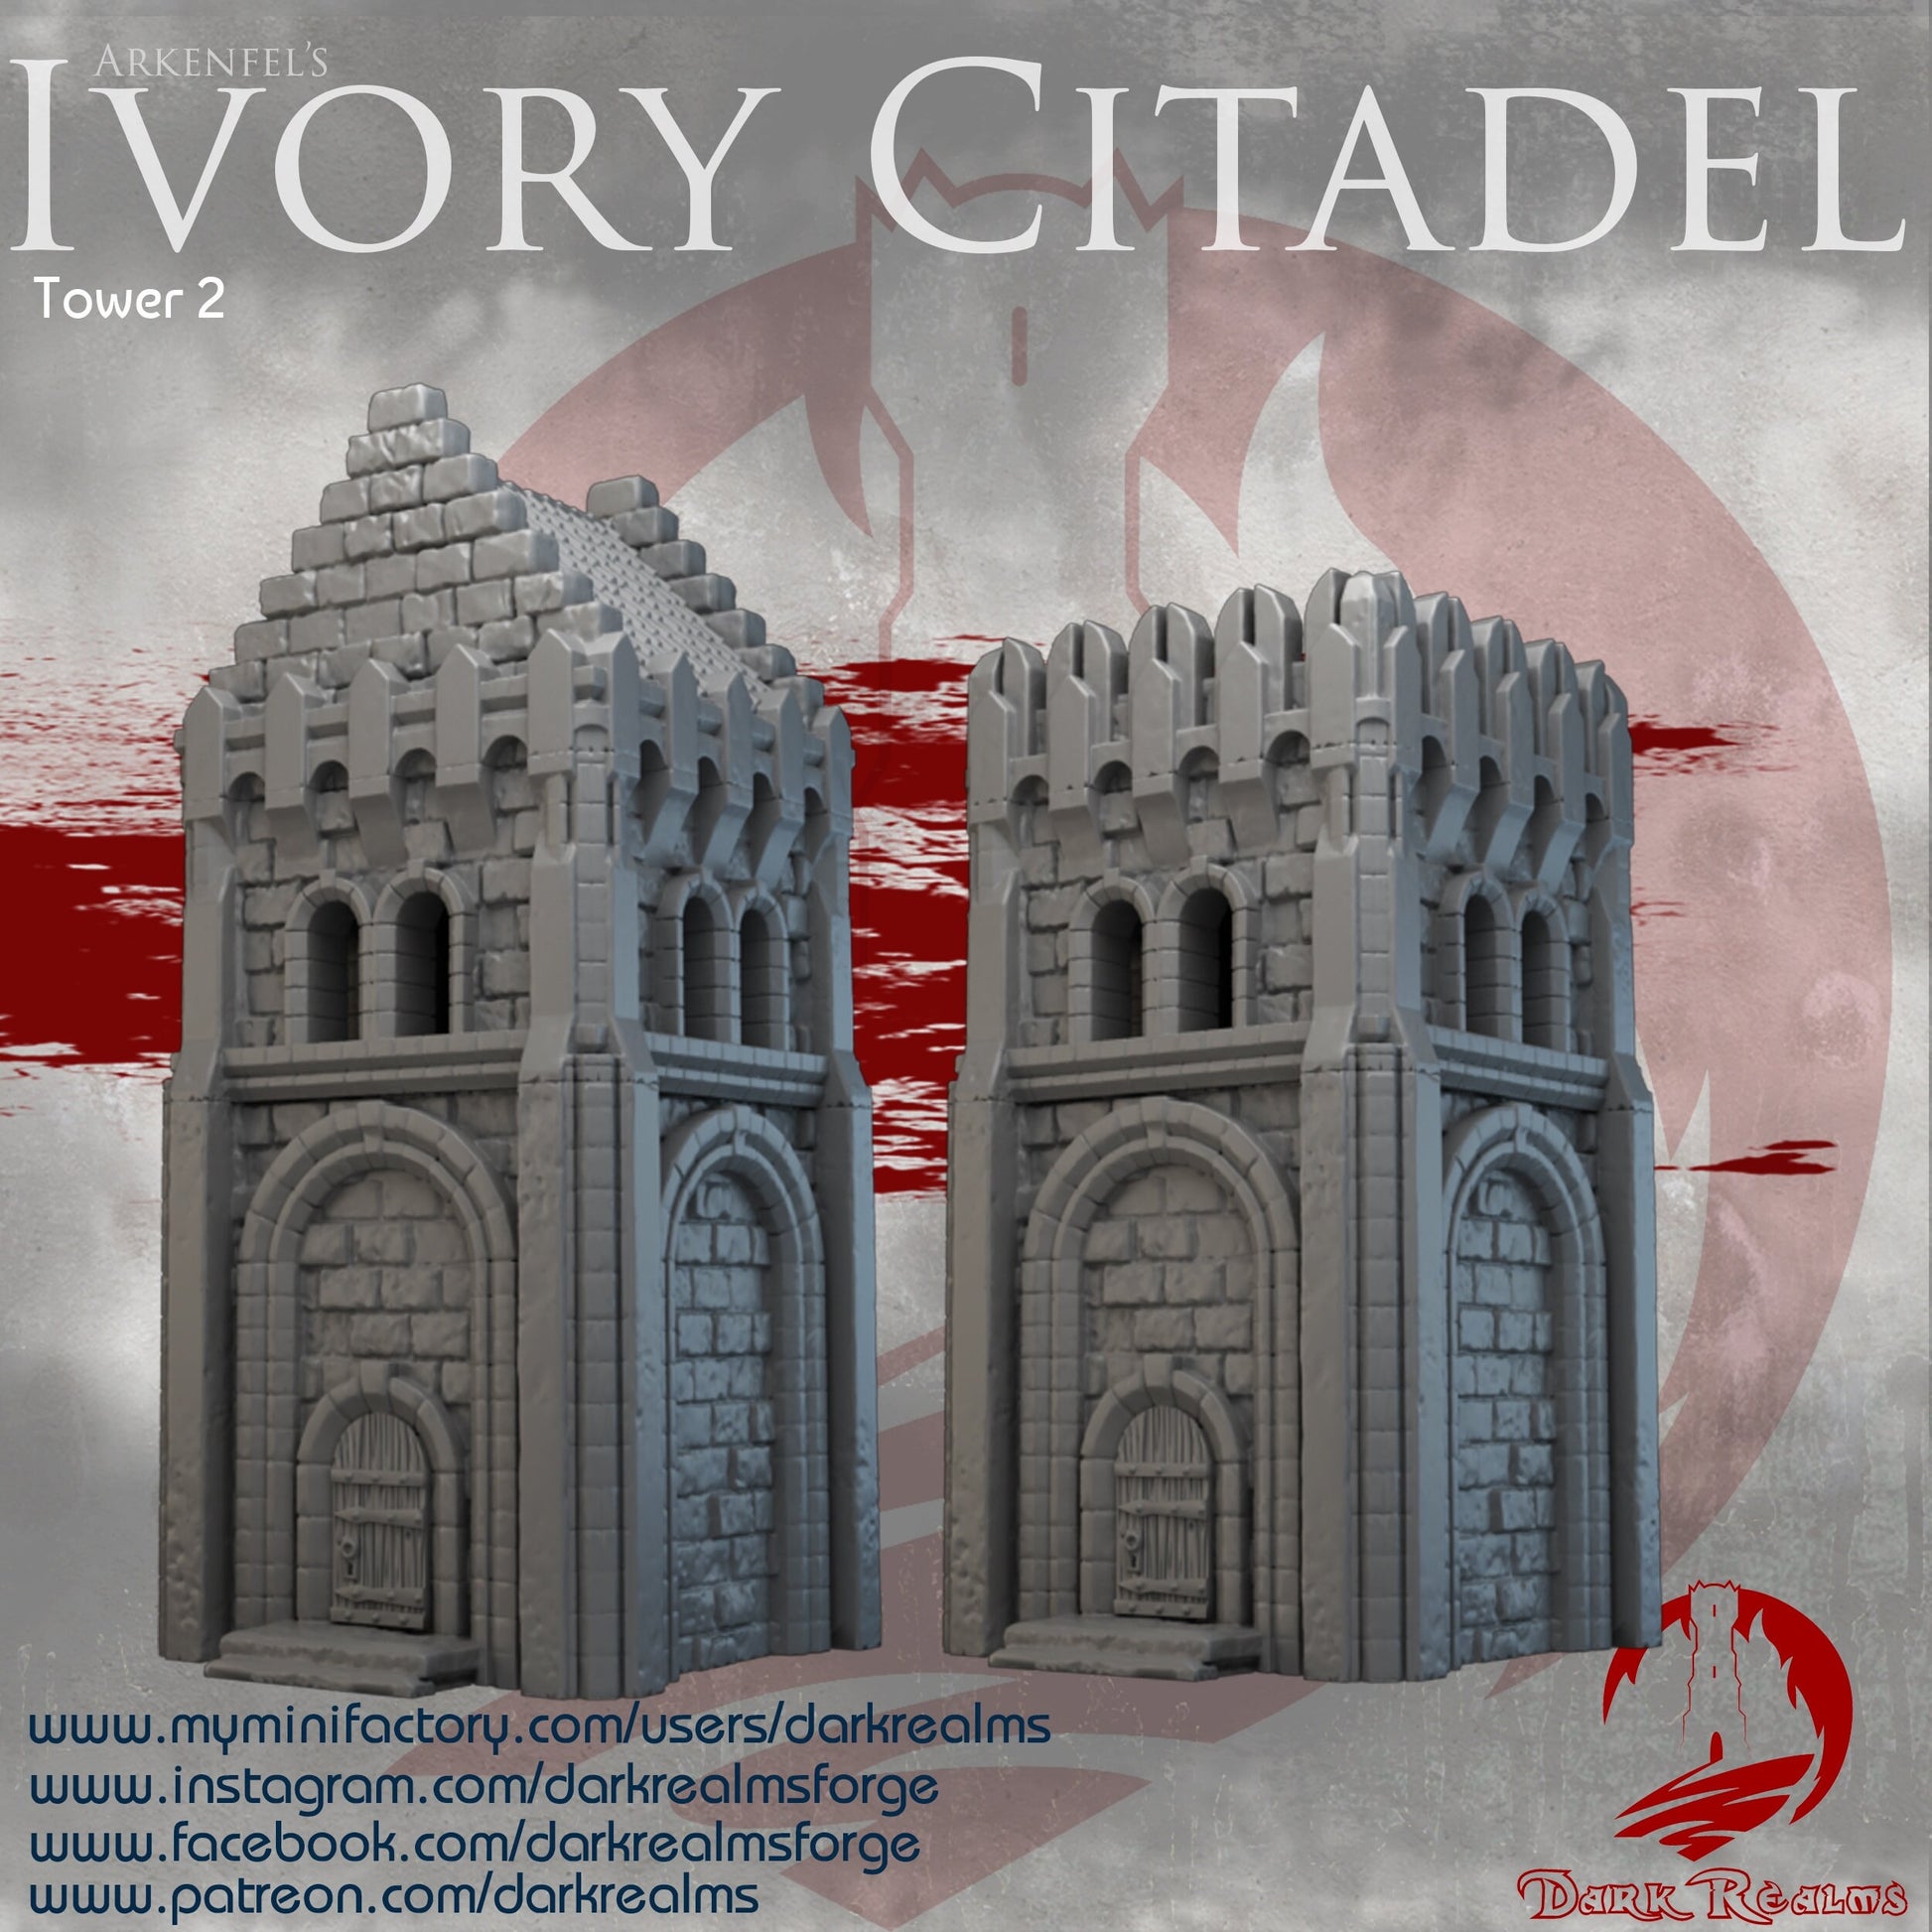 Arkenfel, Ivory Citadel, Trebuchet set, Defense Weapon, Tower Defenses, Field defenses, Dungeons and Dragons, Lord of the Rings, Tower, Ivory Tower, Tower Set, Osgiliath, Minas Tirith, Mordheim, Osgiliath, tabletop terrain, terrain, game table